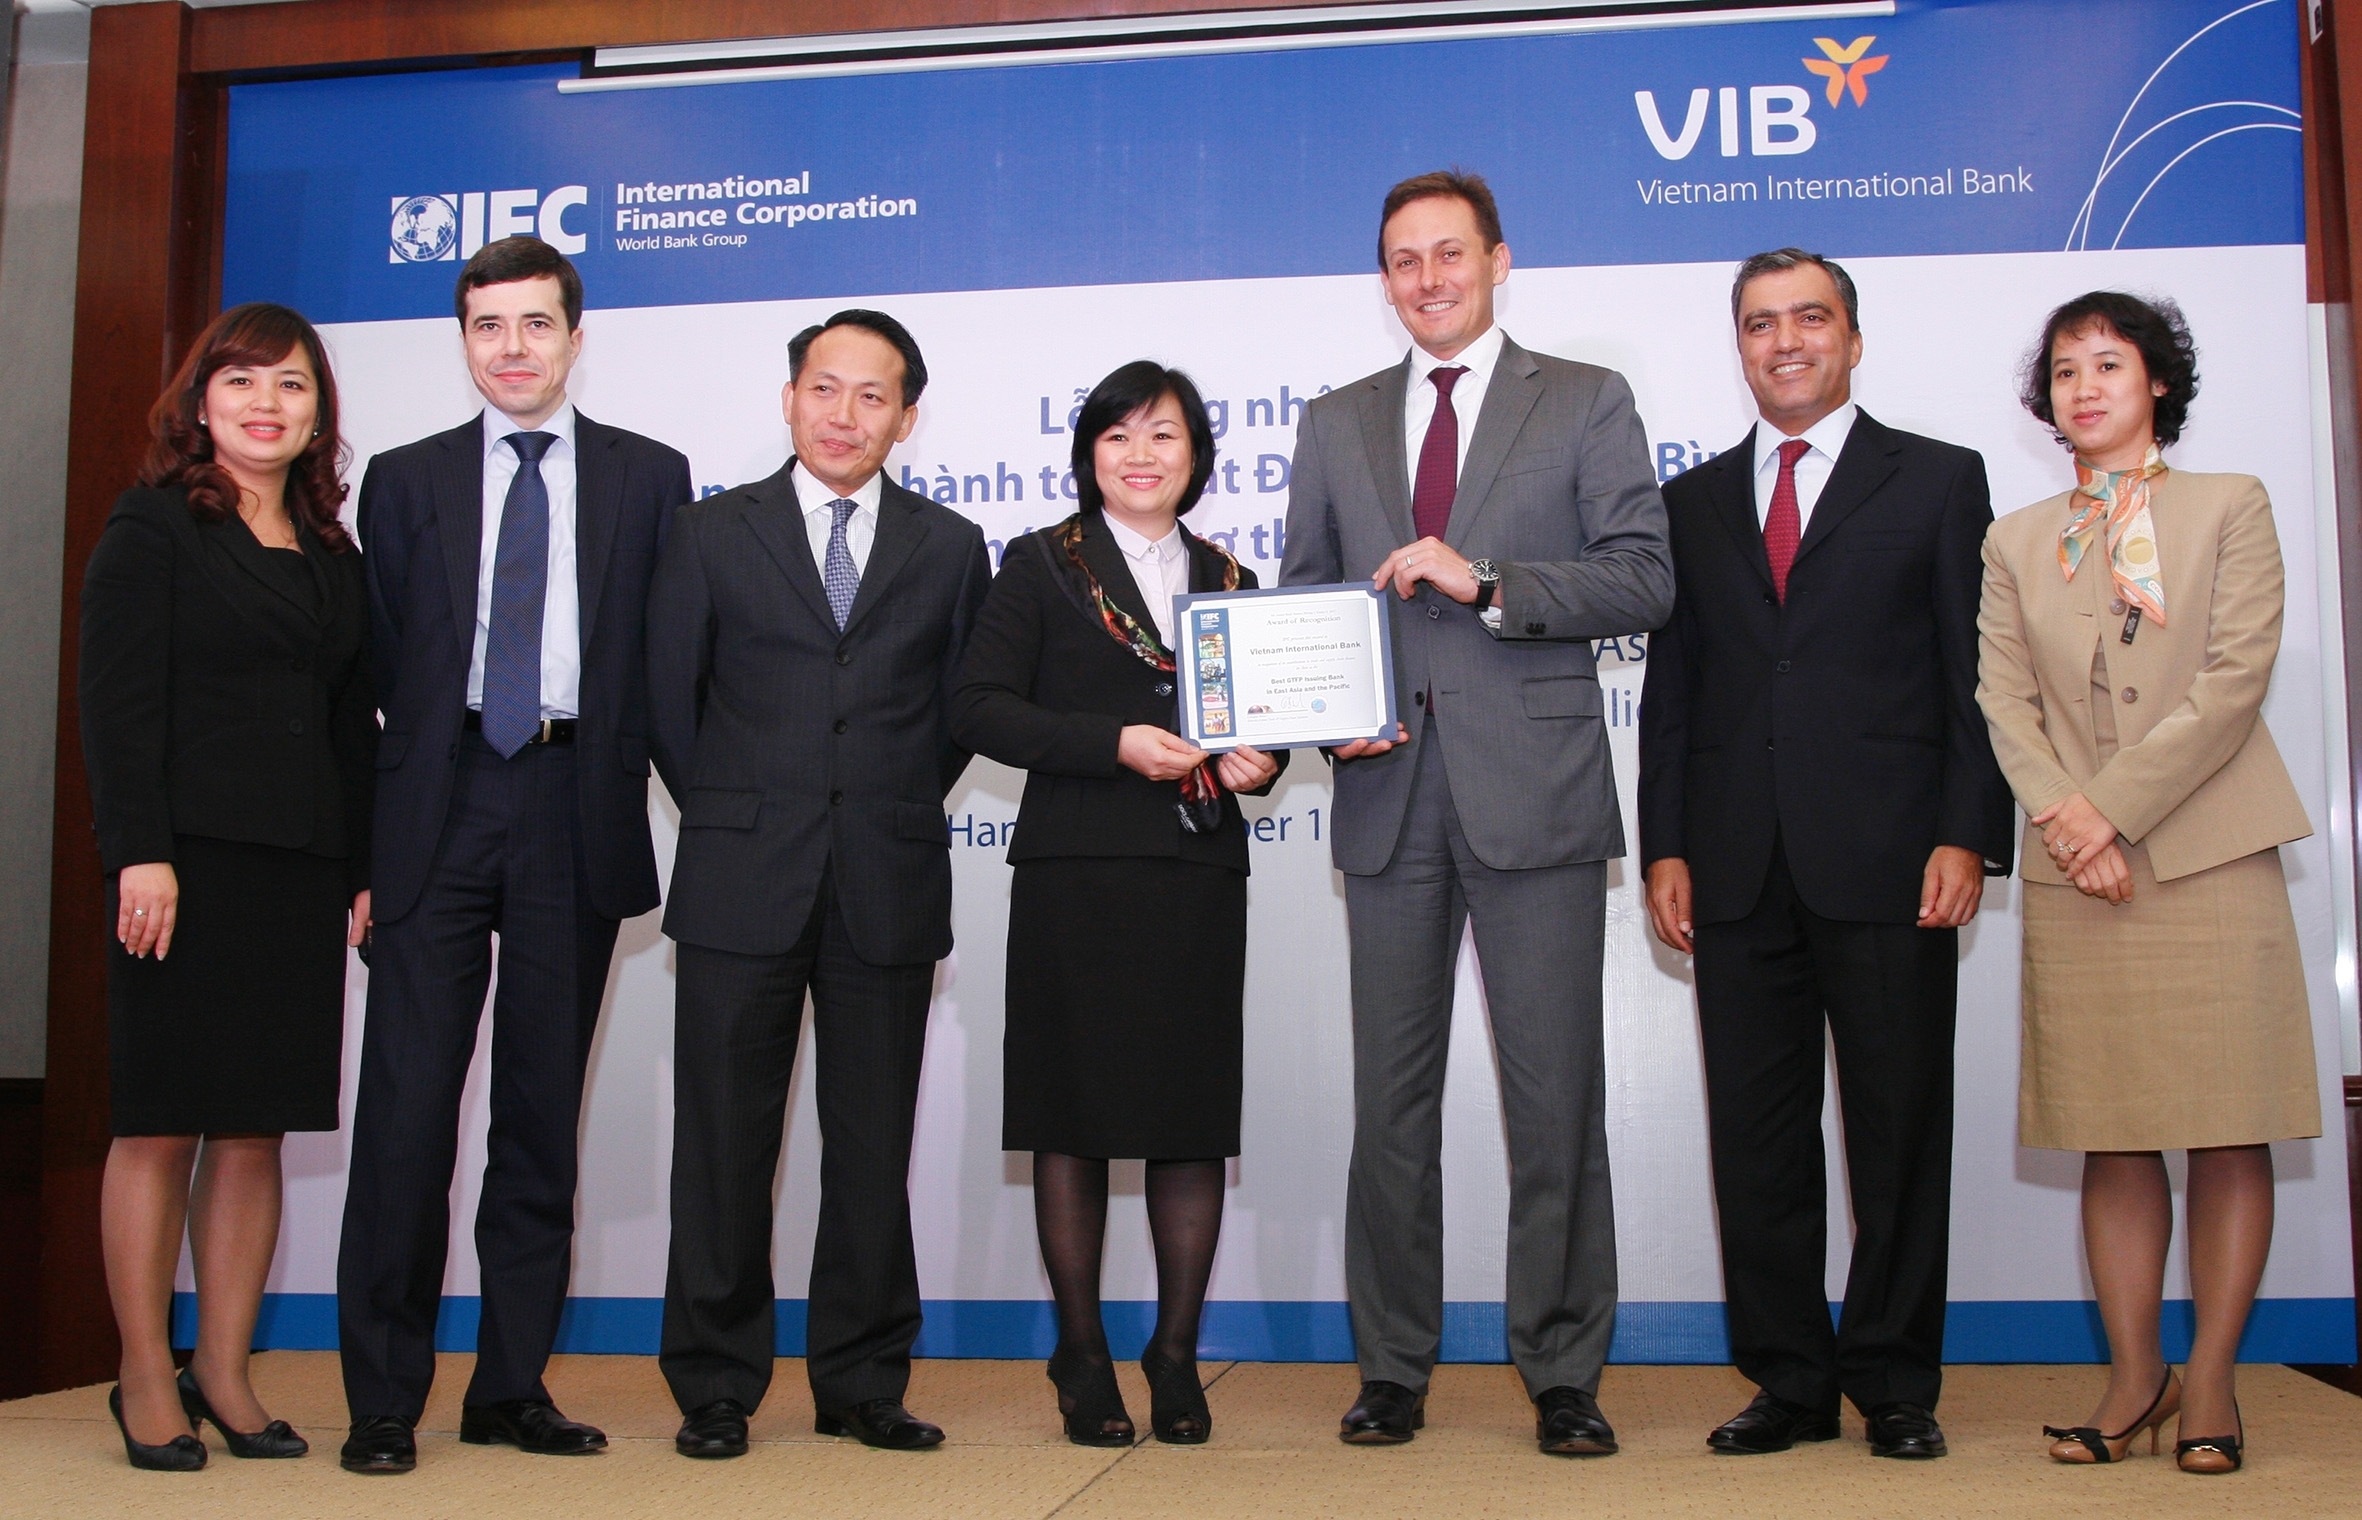 IFC issues sign of respect for VIB